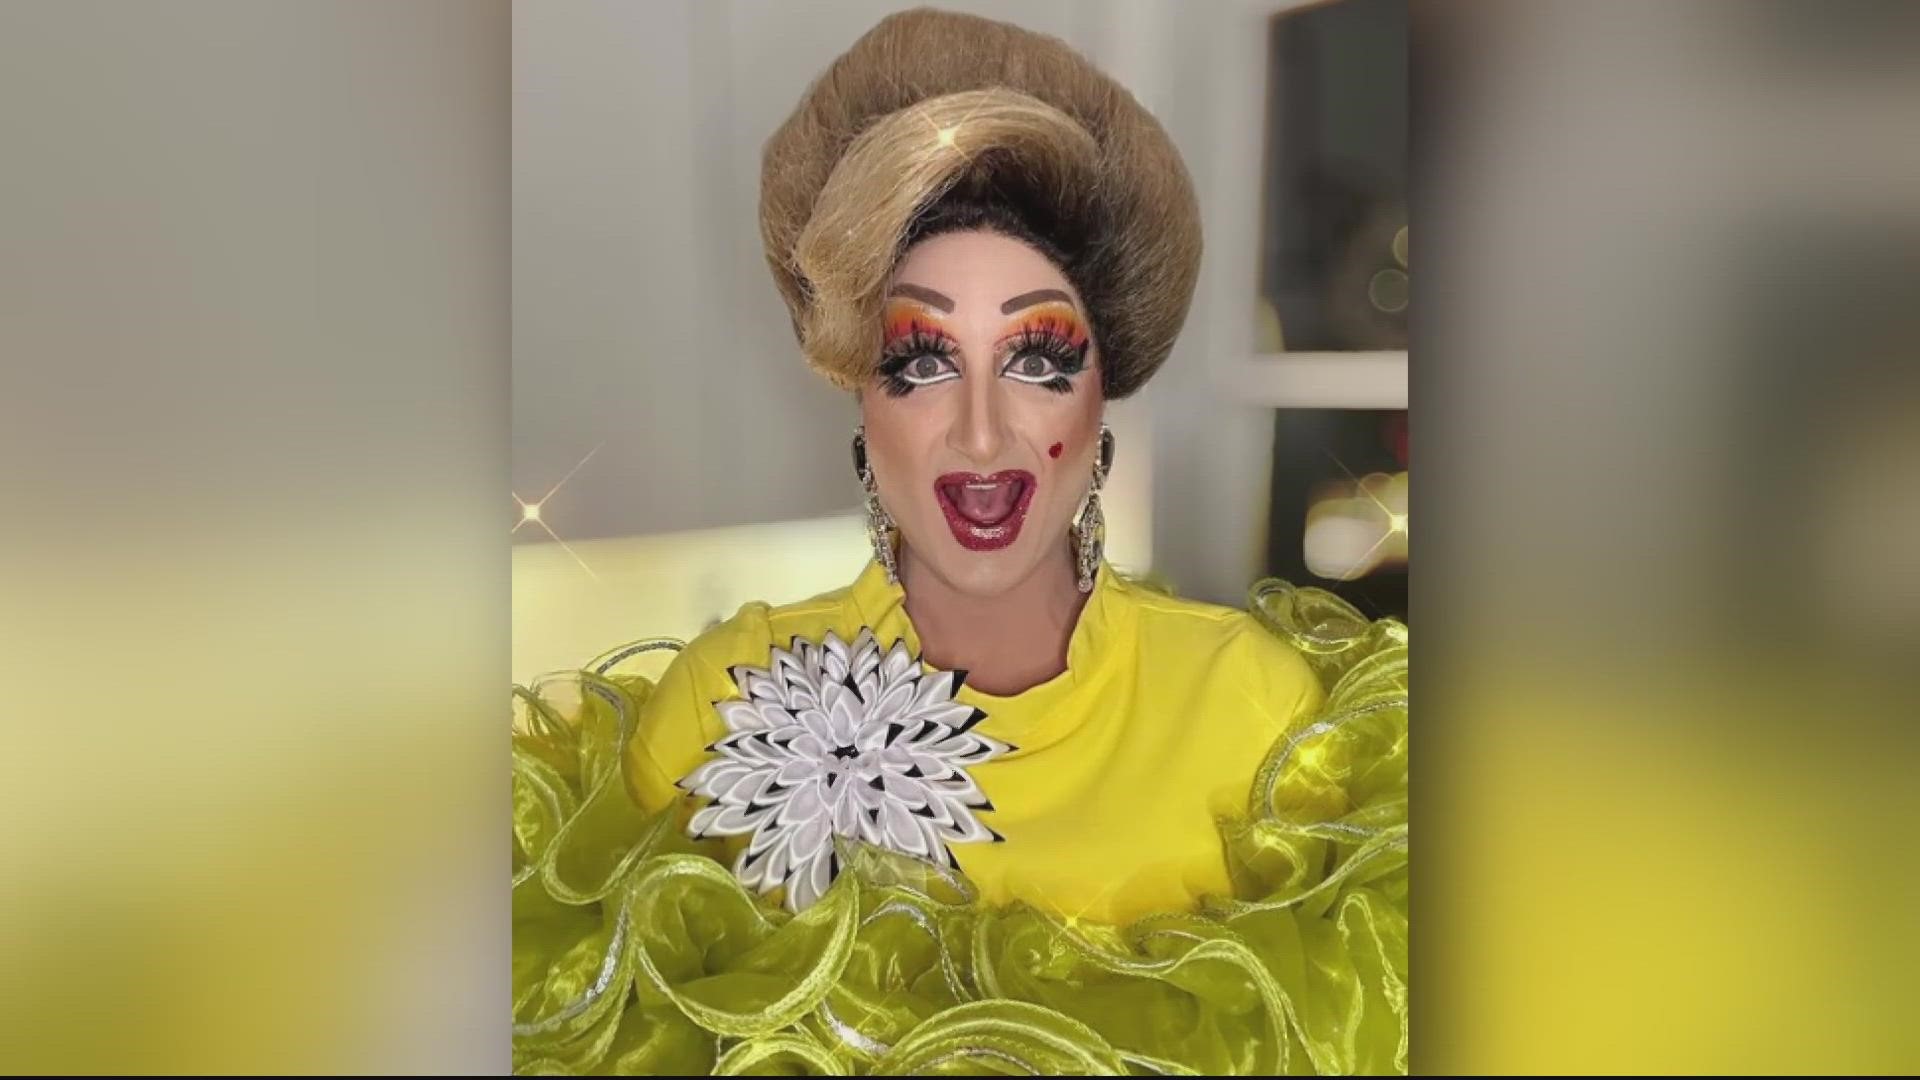 A Drag Queen storybook hour in Montgomery County was targeted by members of the Proud Boys last Saturday.